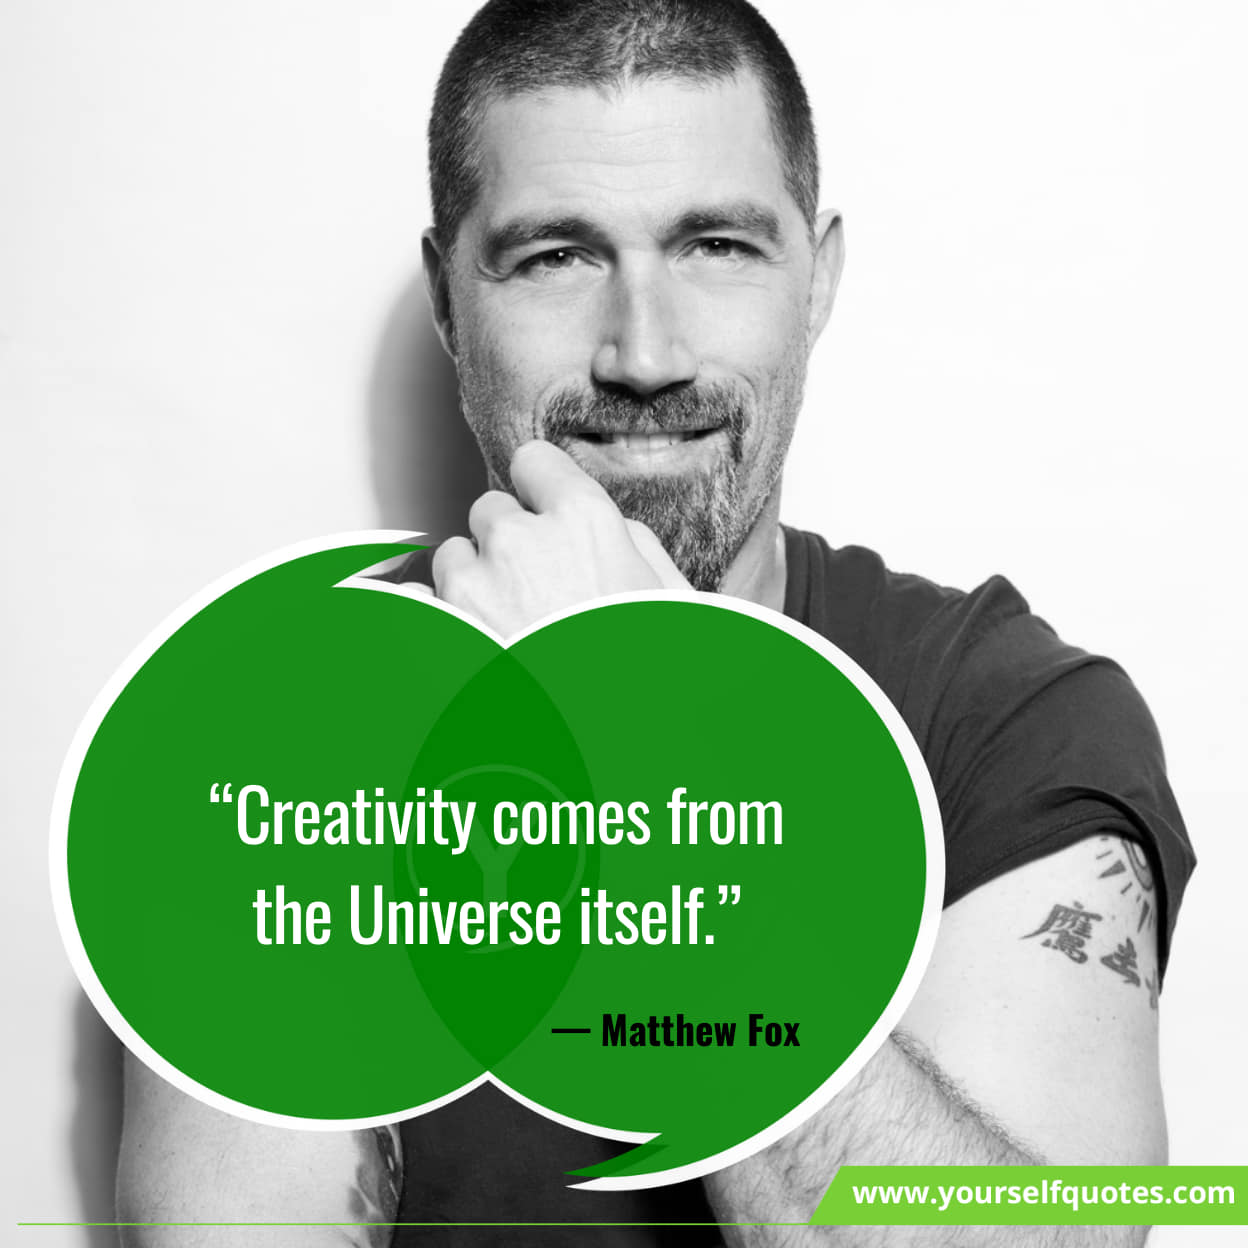 Matthew Fox Quotes About Creativity